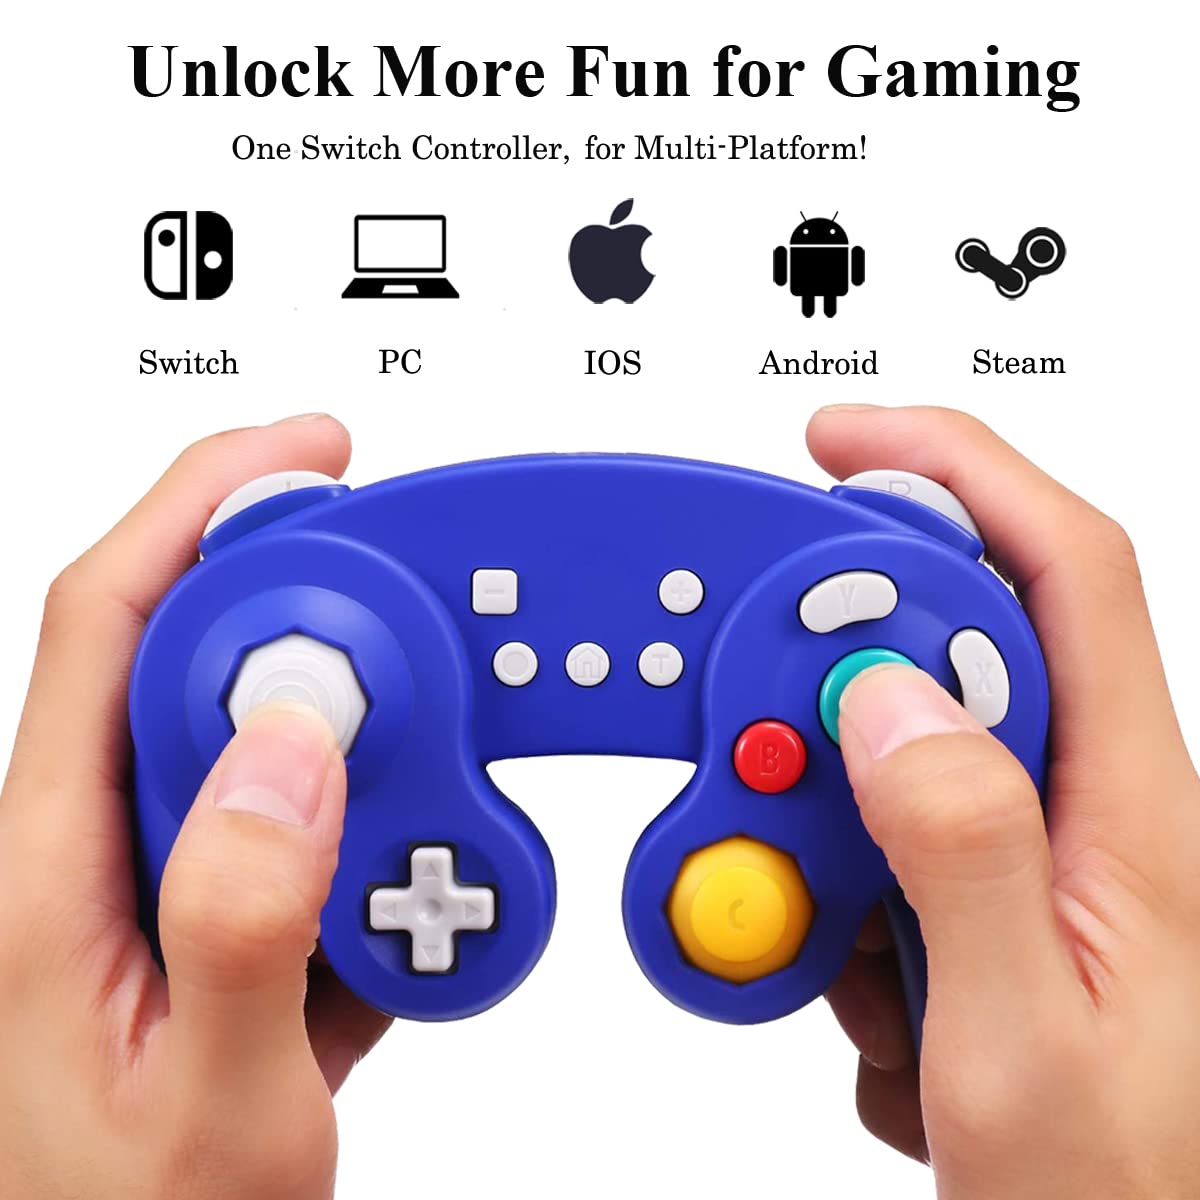 Exlene Wireless Gamecube Controller Switch, Compatible with Nintendo Switch and PC, Rechargeable, Motion Controls, Rumble, Turbo (Bluetooth Version)